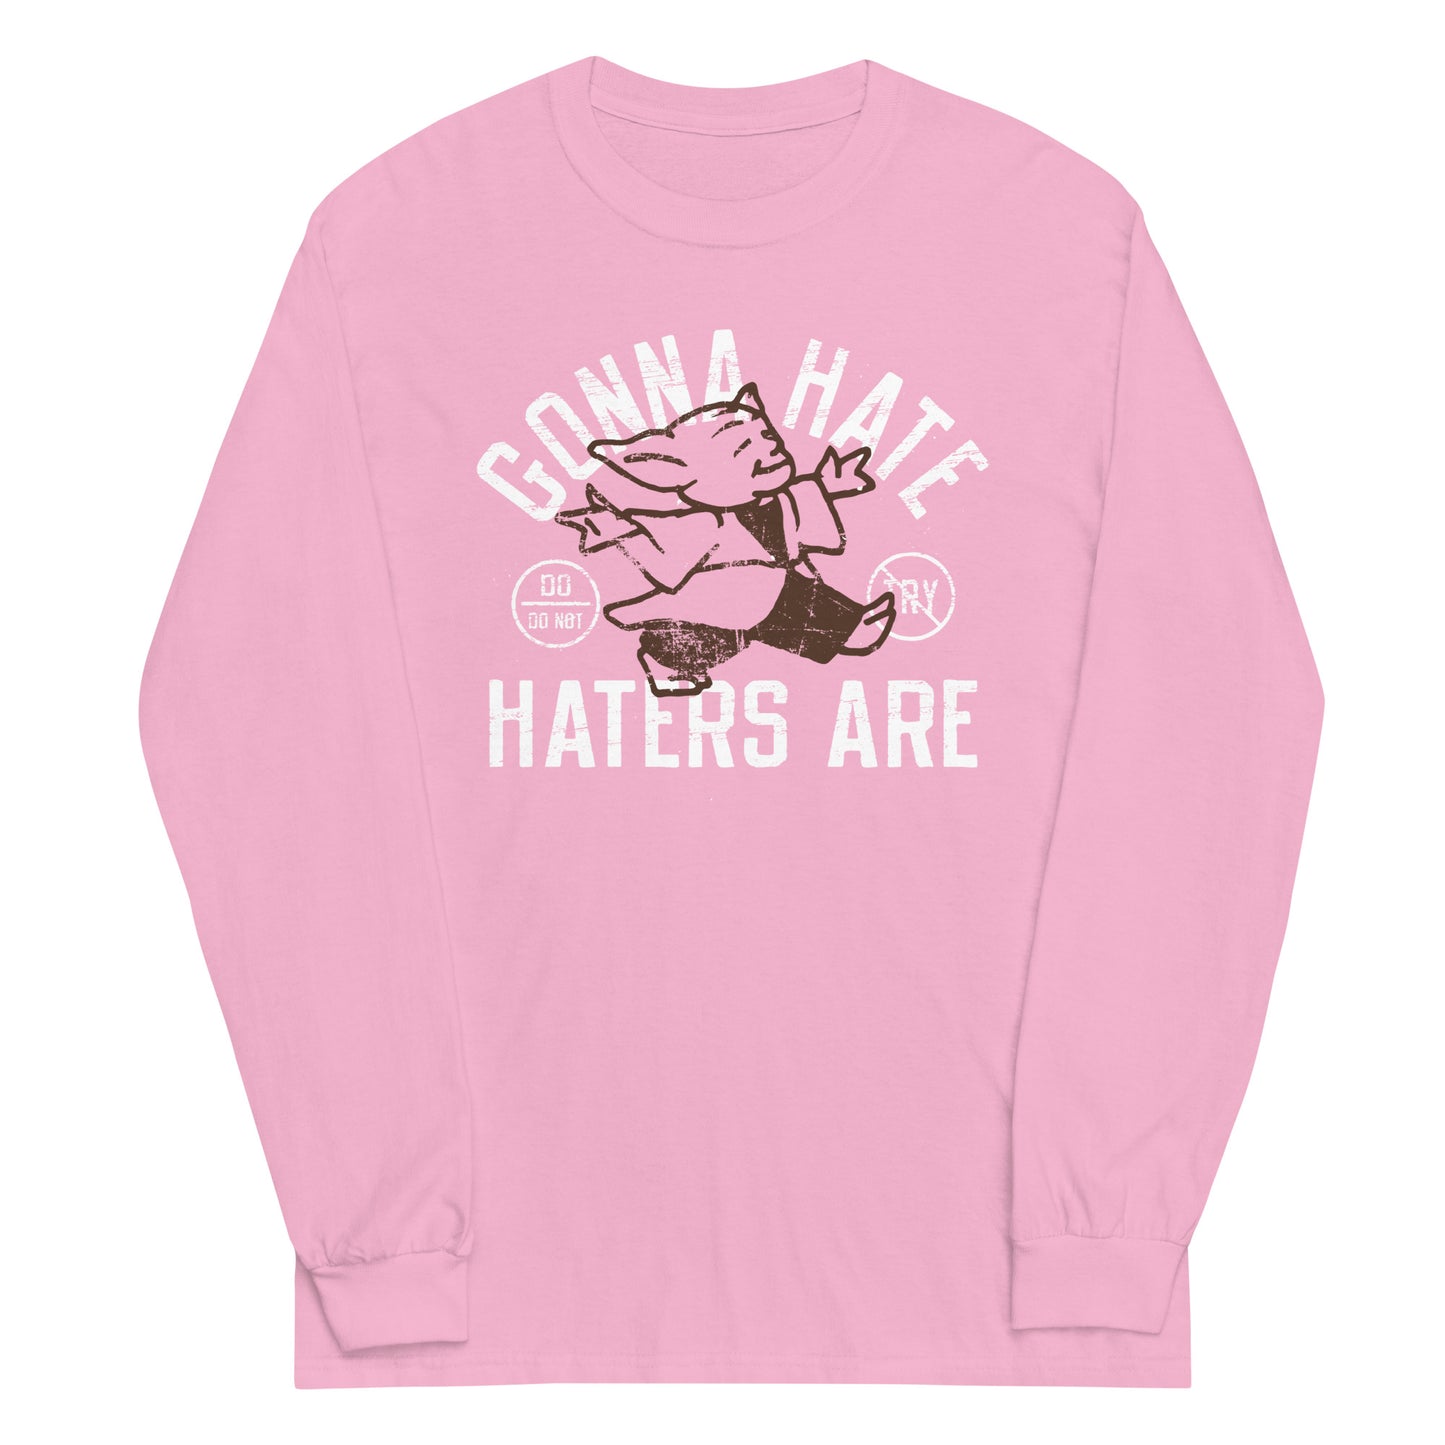 Gonna Hate Haters Are Unisex Long Sleeve Tee